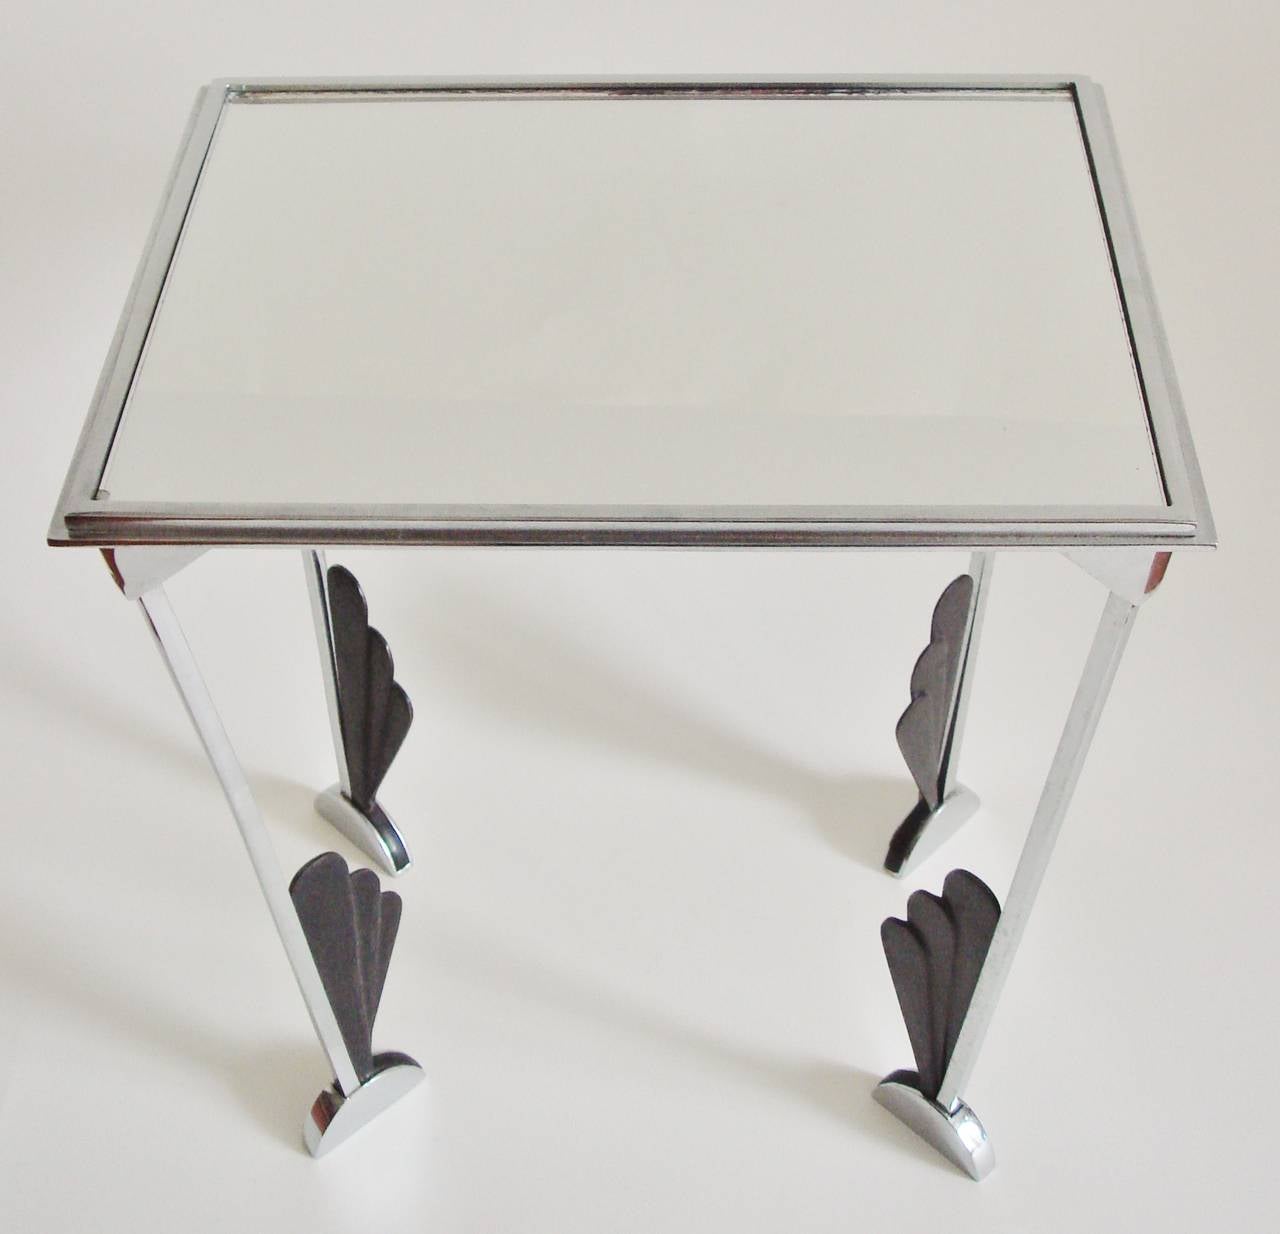 This delightful little American Art Deco chromed steel and mirror topped tray table or magazine stand features black enamelled 